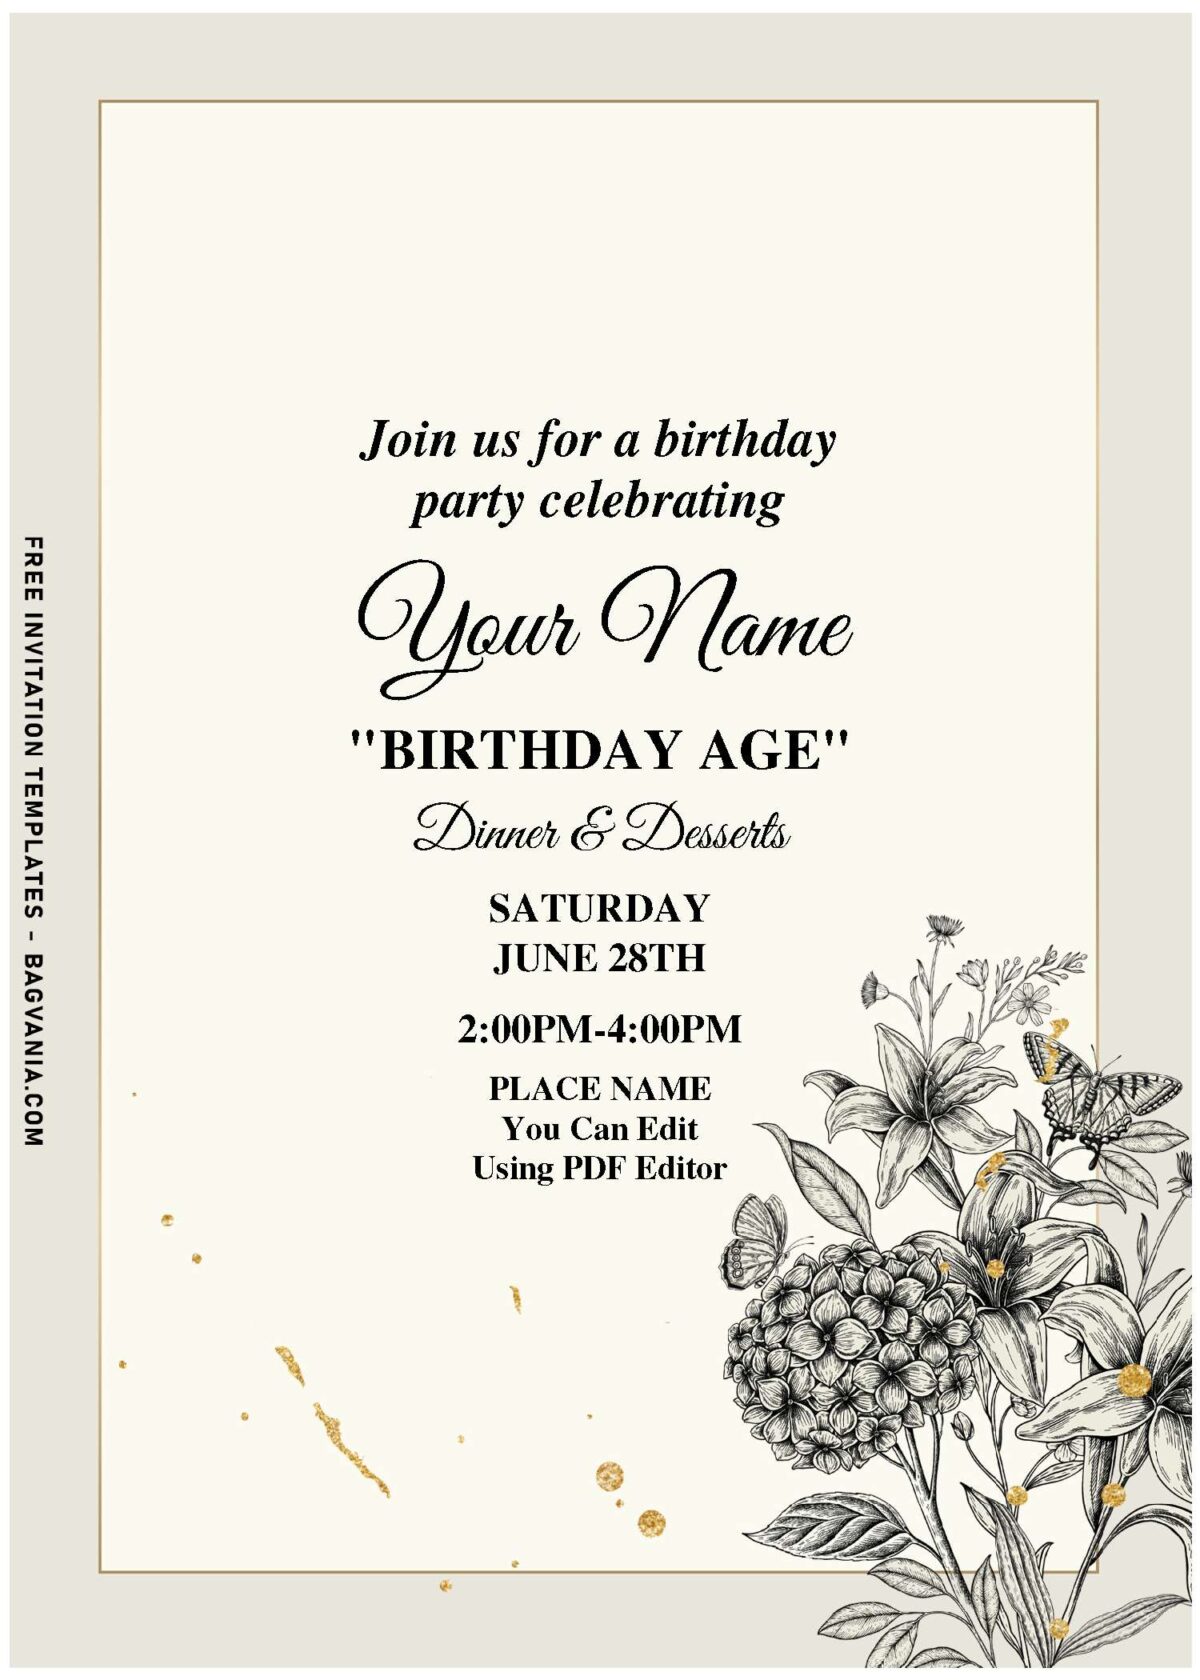 (Free Editable PDF) Monochrome Floral Evening Birthday Invitation Templates with black and white floral line art